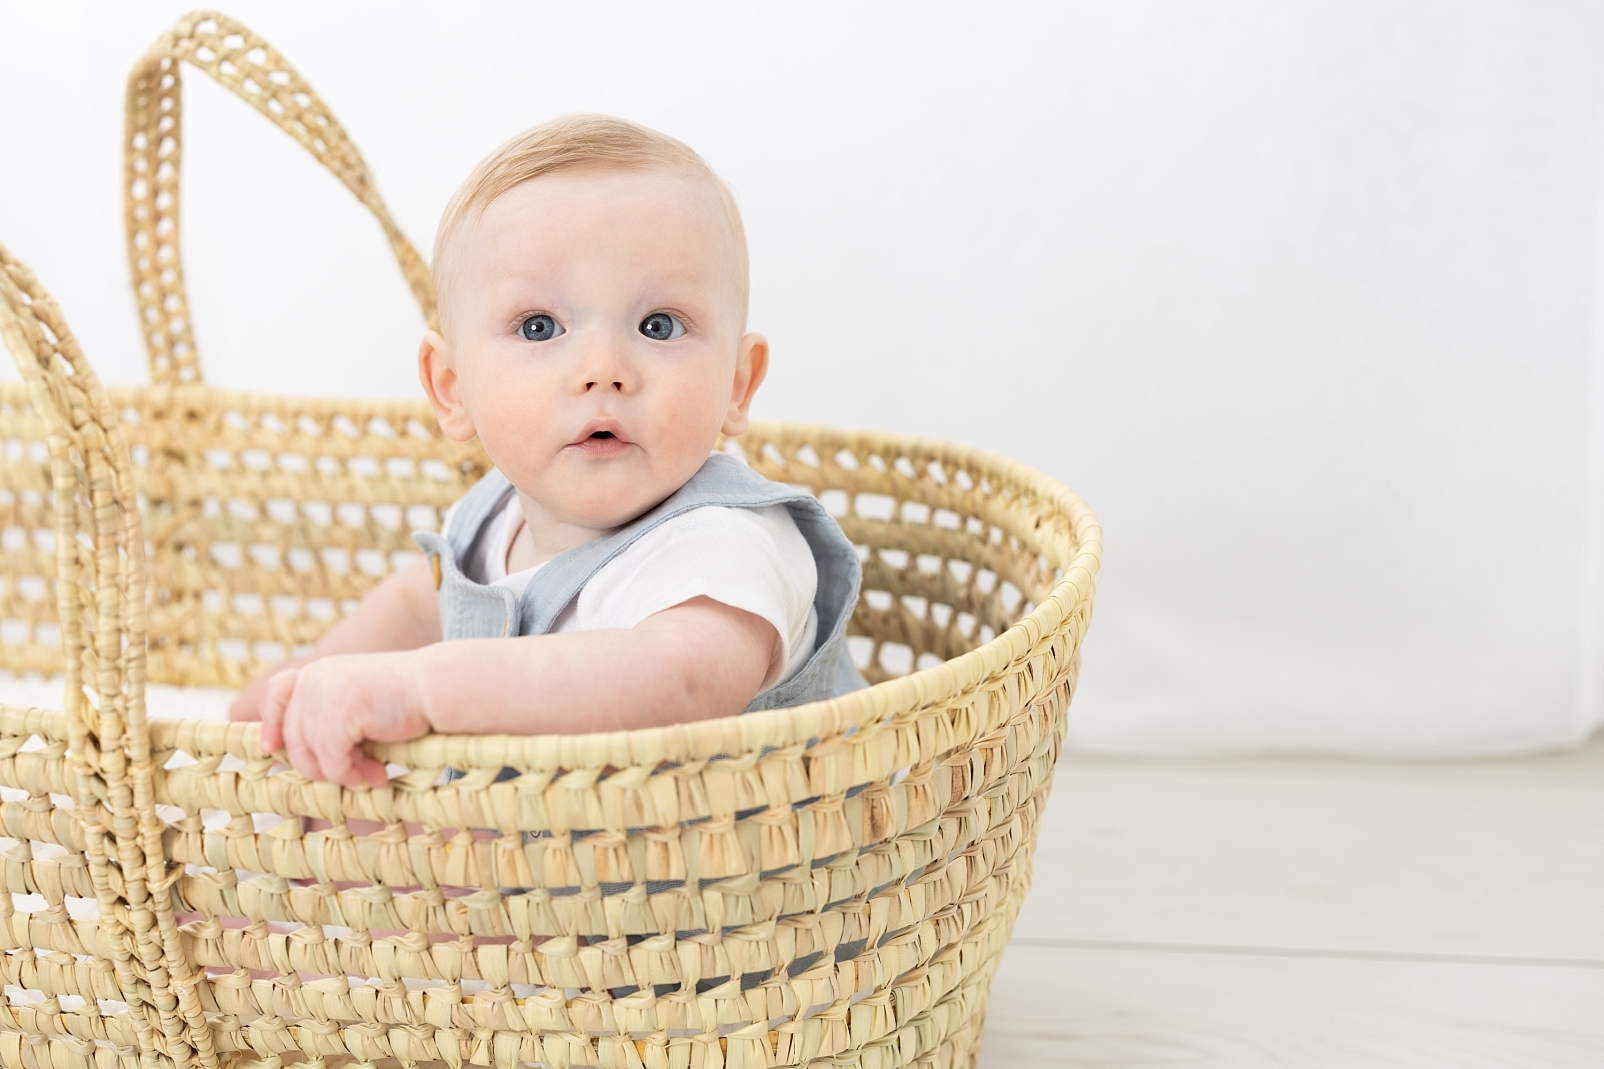 7 months milestone portraits of baby boy in light blue overalls sitting in a basket

